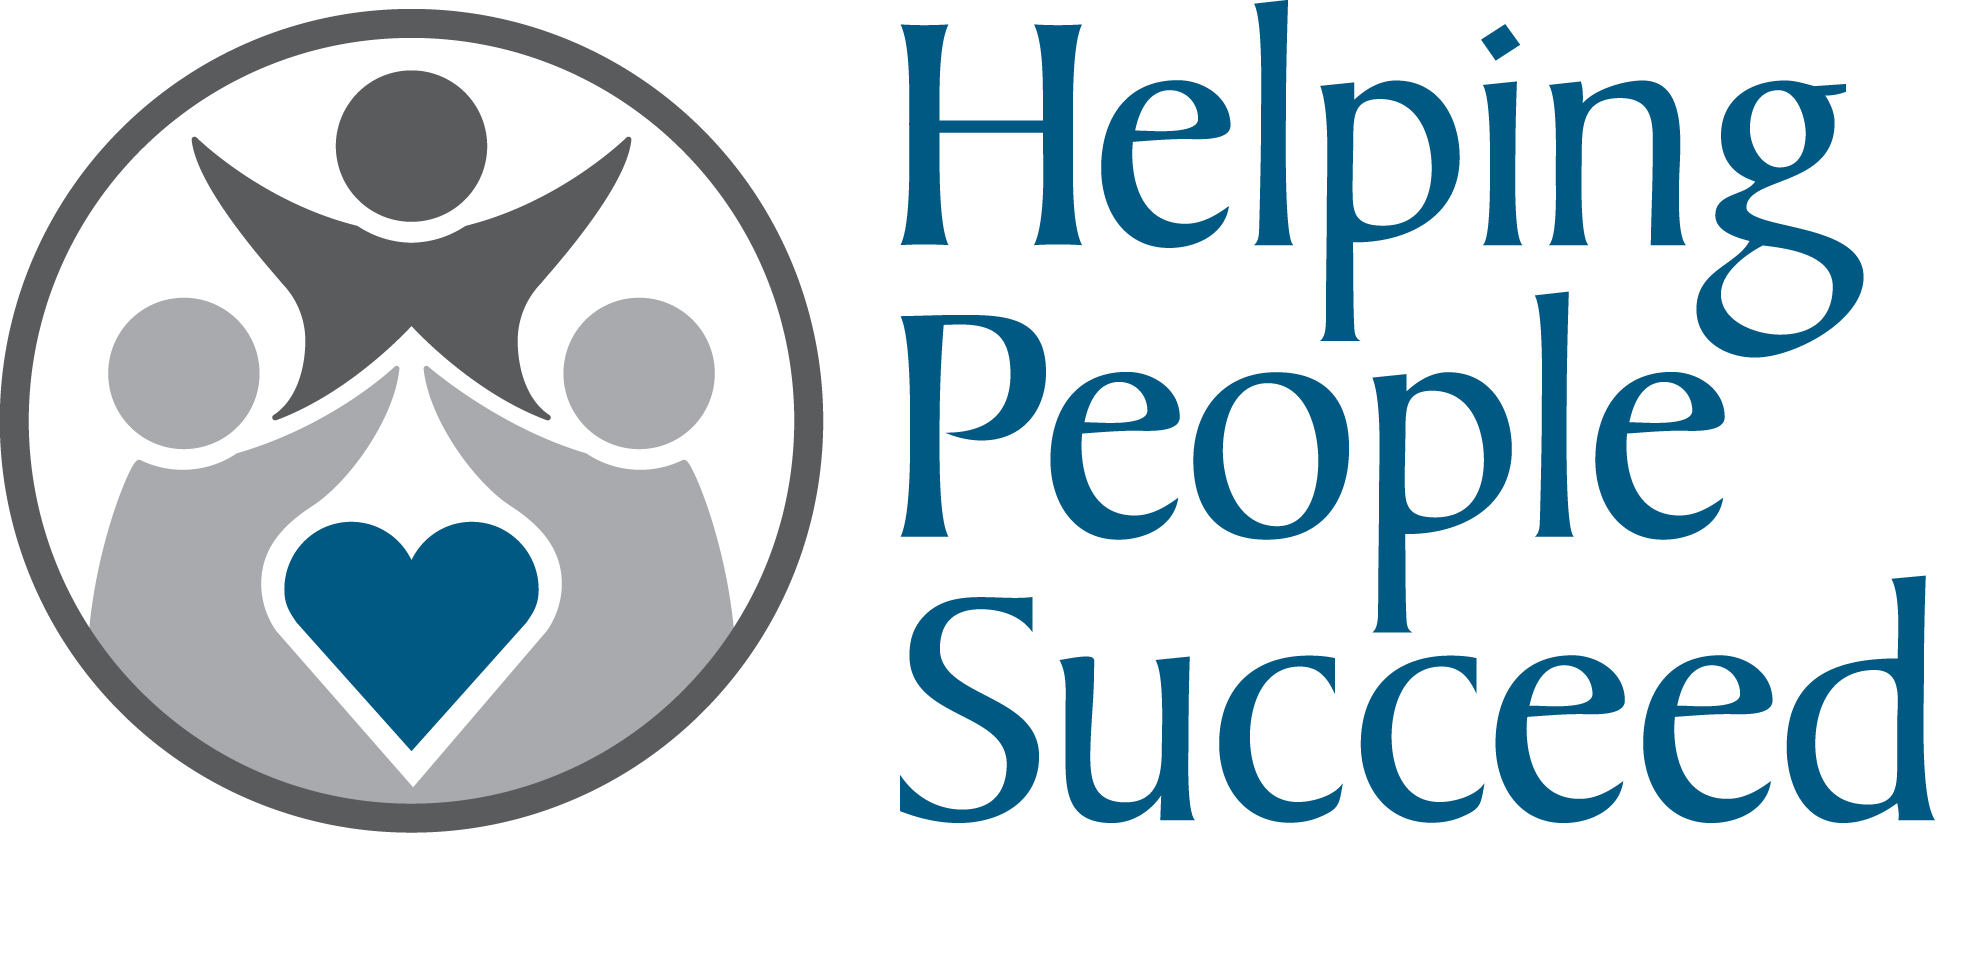 Free Image Of Helping People, Download Free Image Of Helping People png image, Free ClipArts on Clipart Library